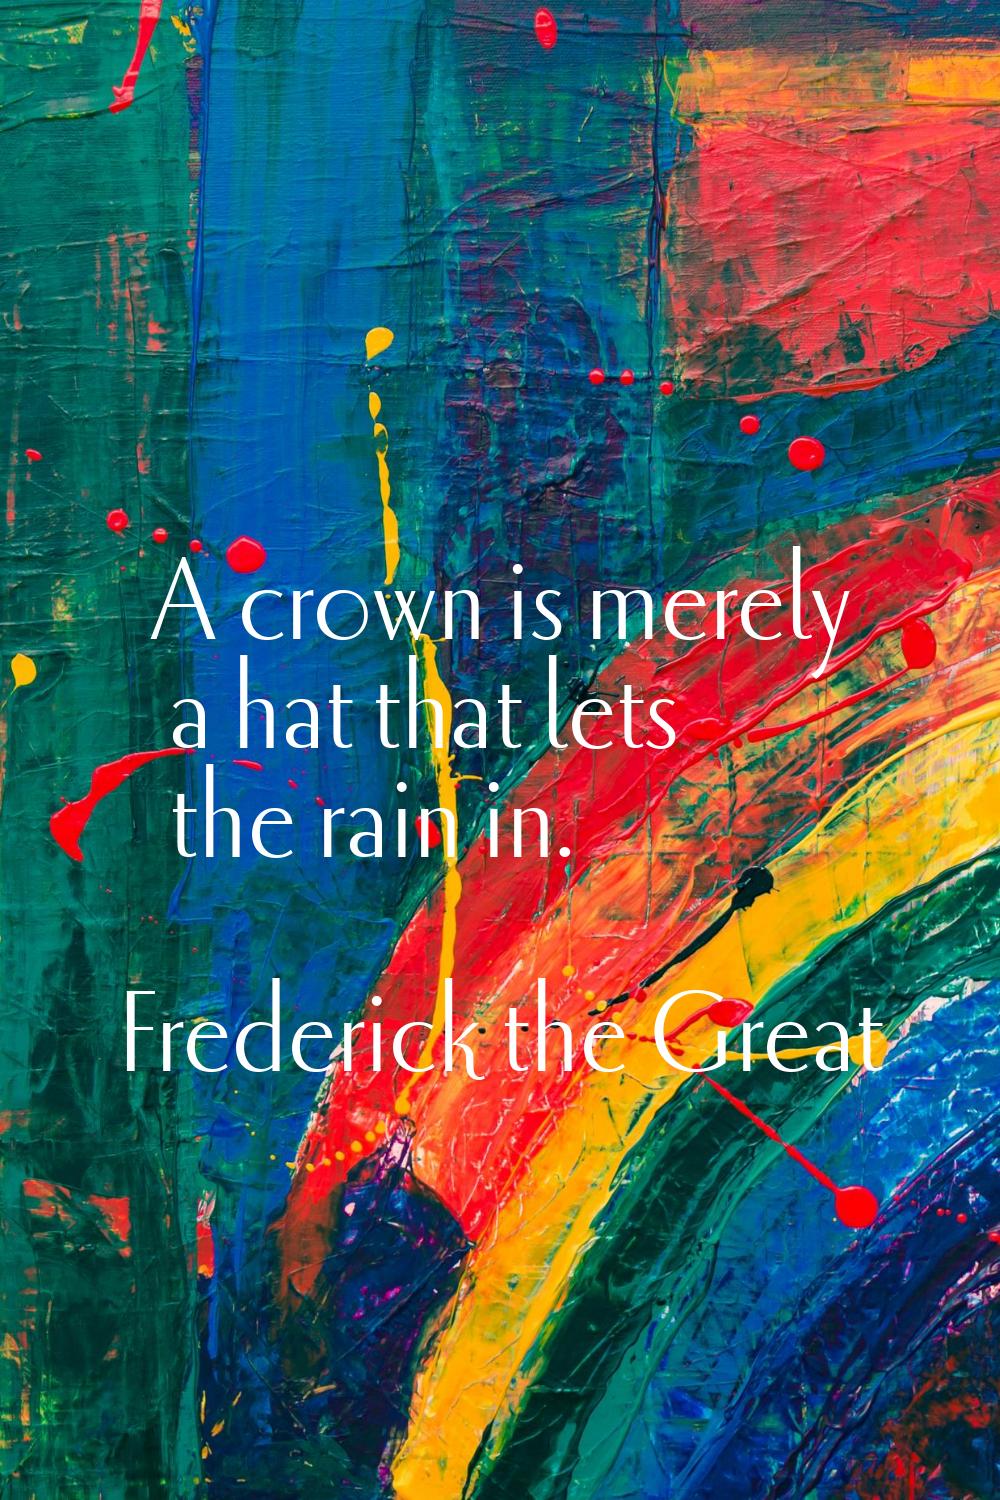 A crown is merely a hat that lets the rain in.